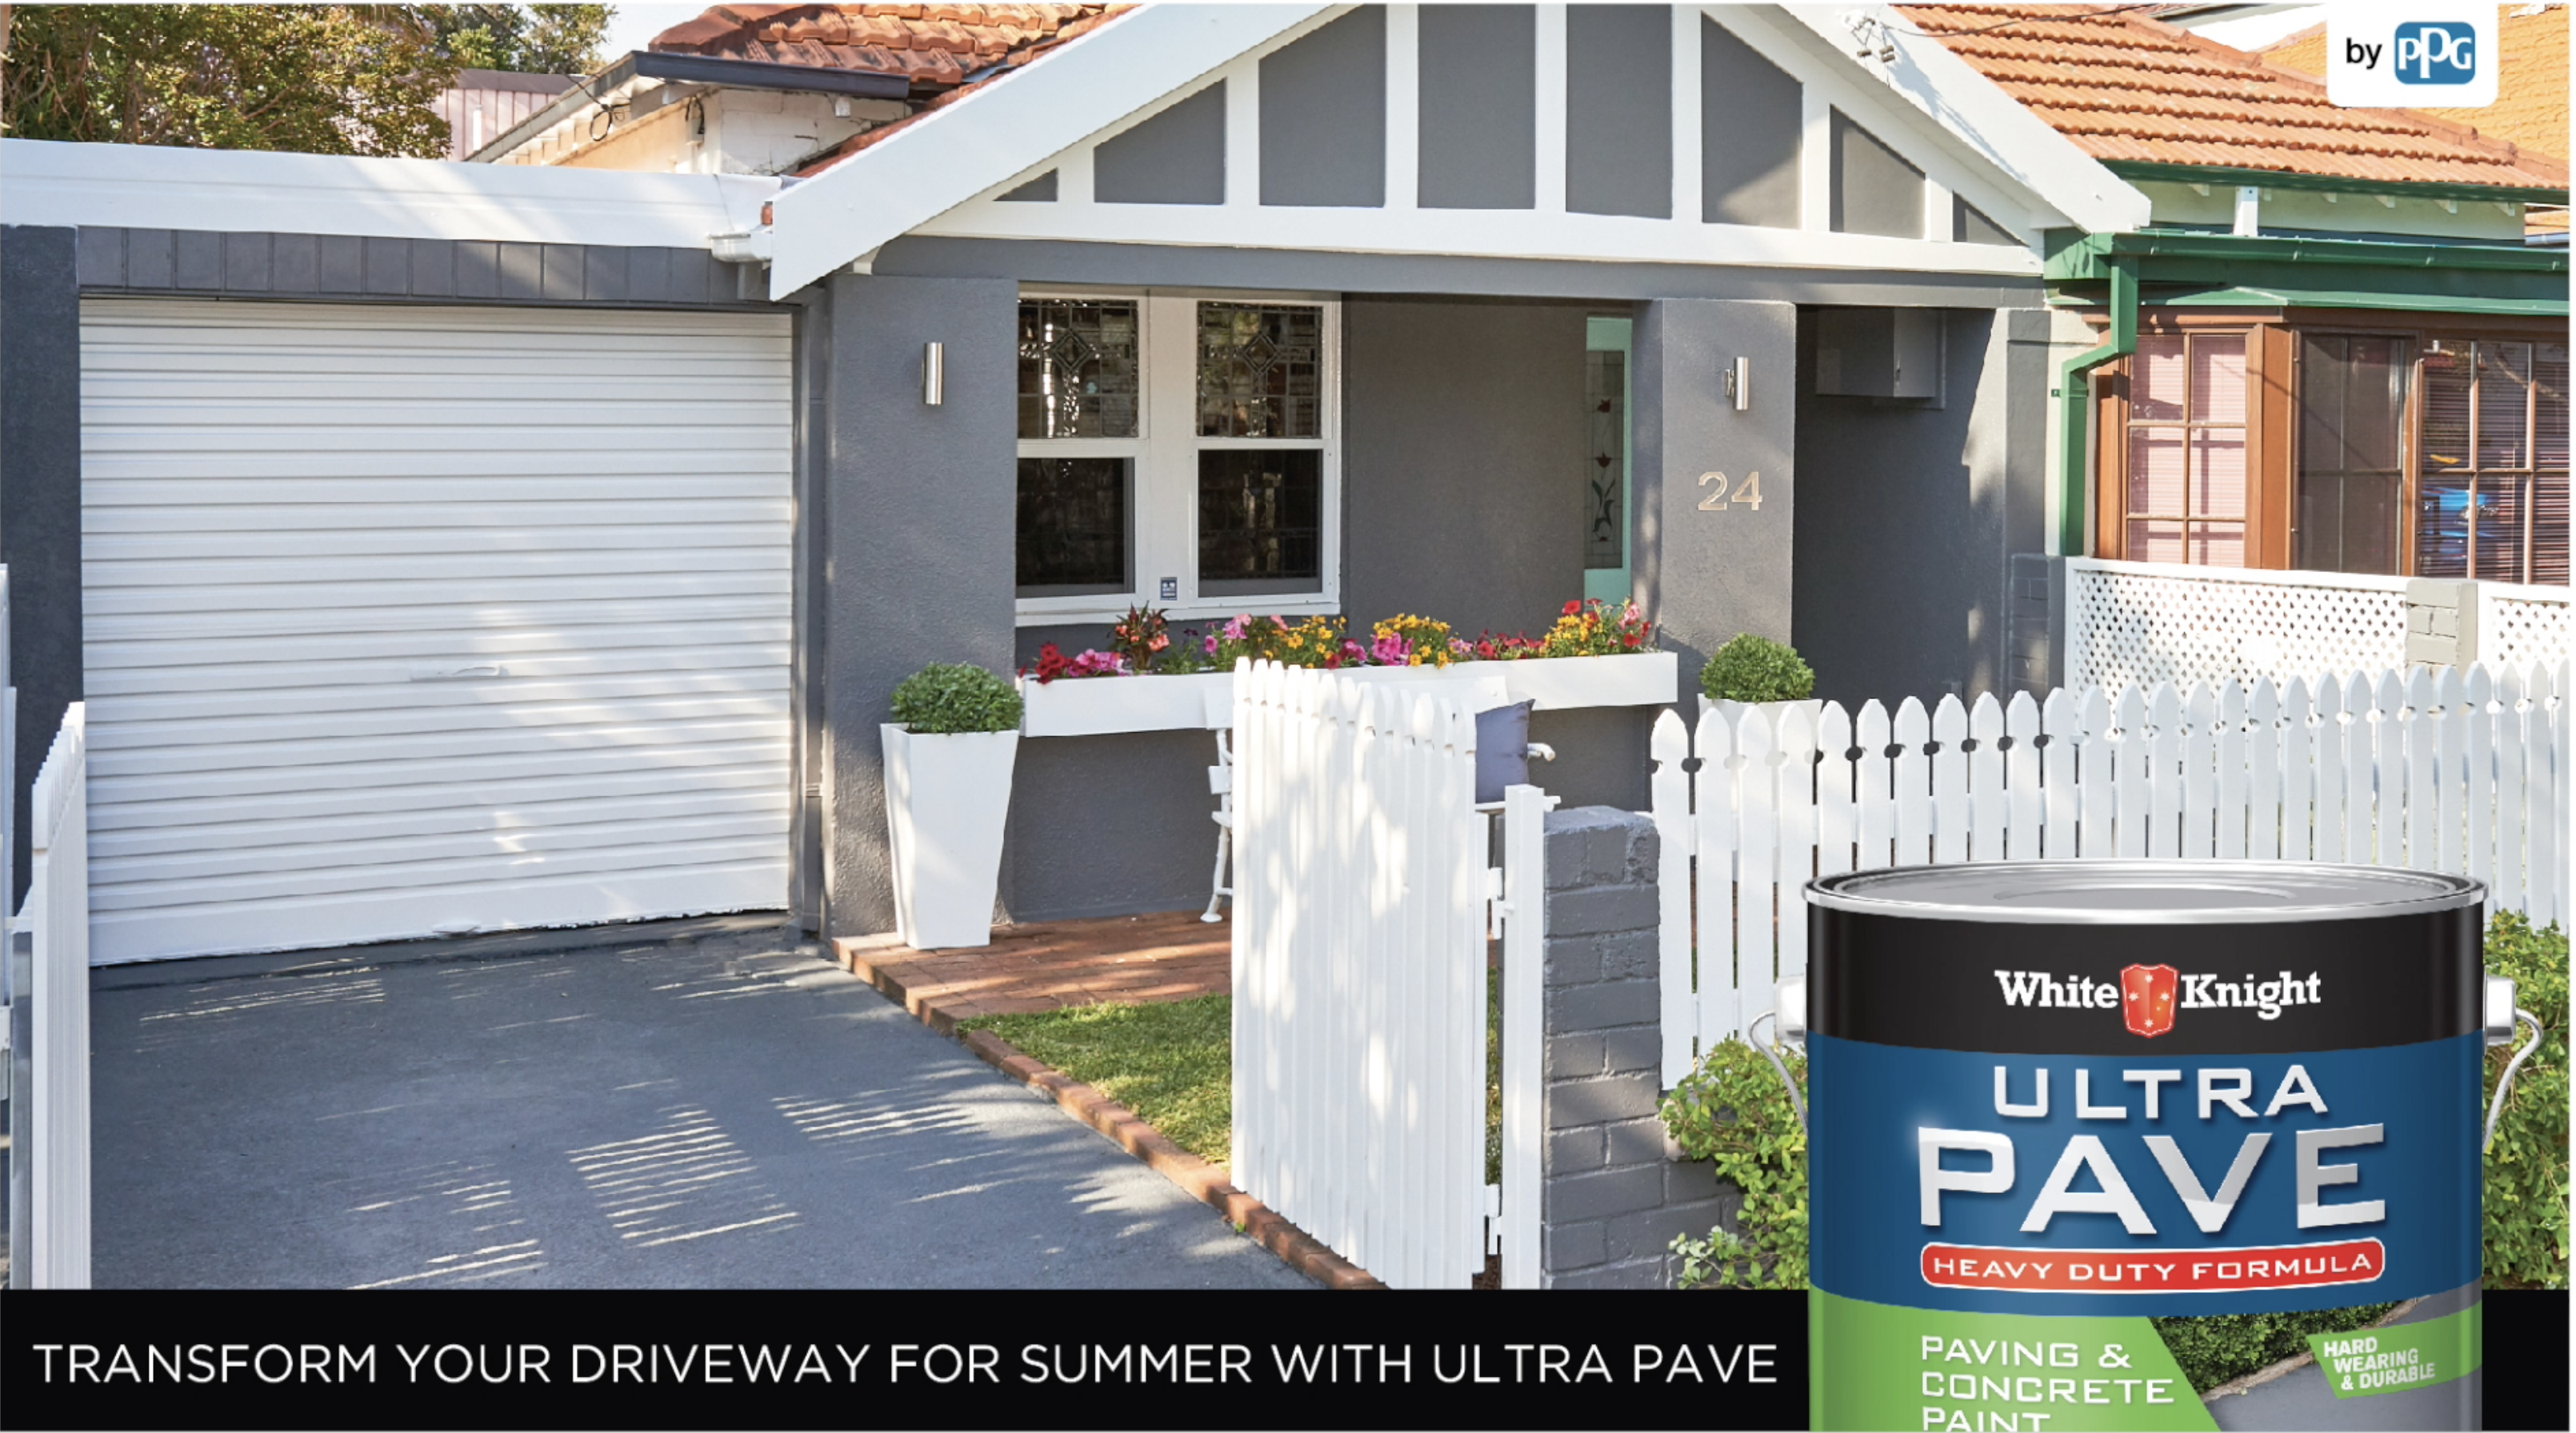 Transform your driveway for summer with Ultra Pave